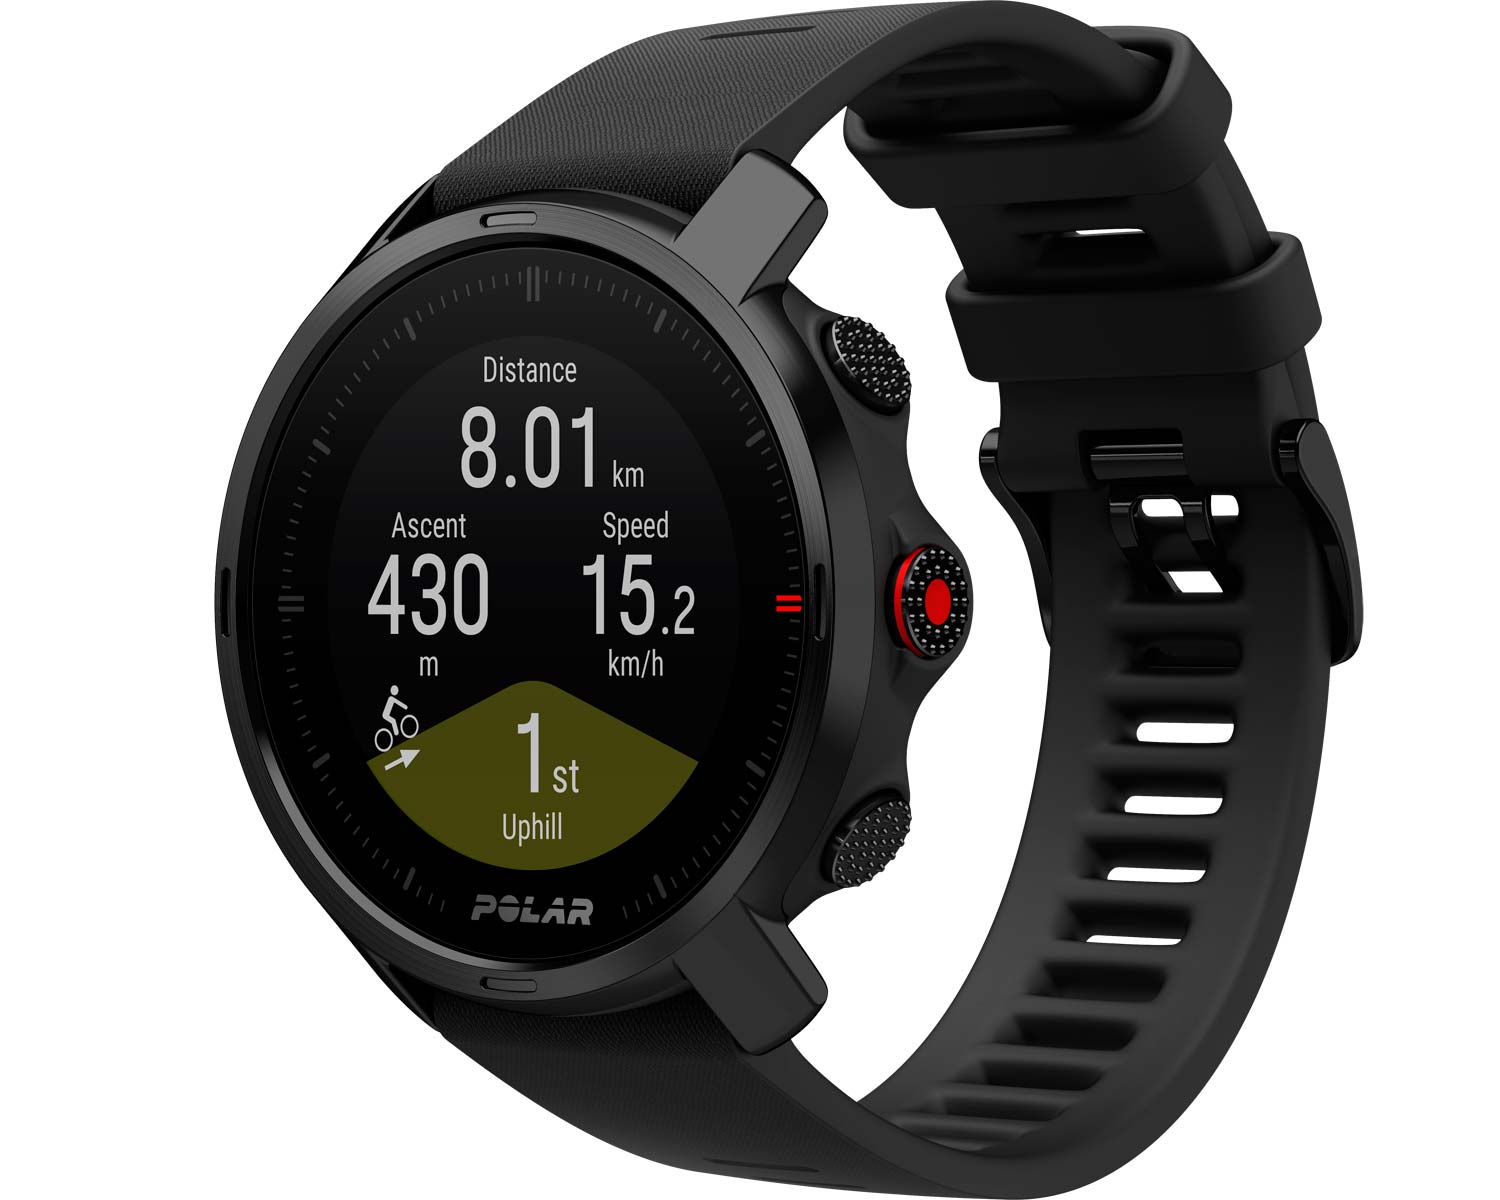 Polar Grit X GPS smartwatch, wrist-based heart rate GPS tracking training smart watch cycle computer for cyclists runners